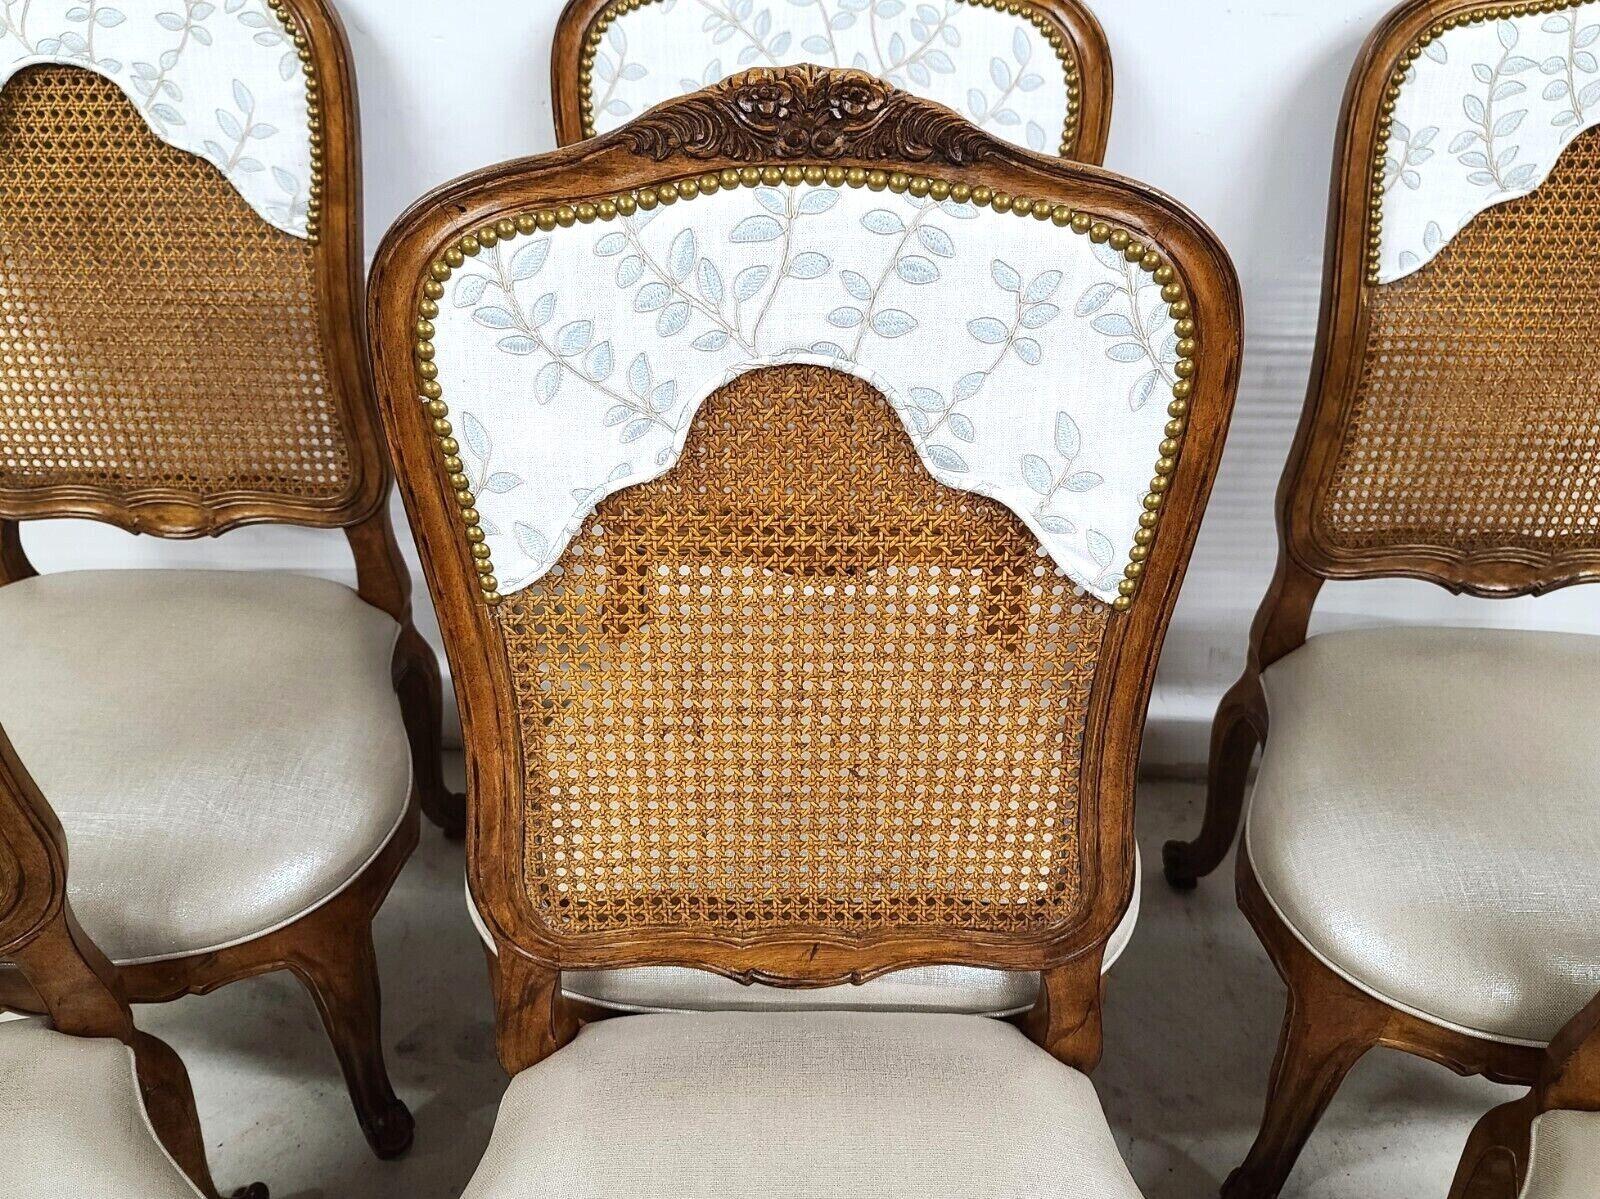 For FULL item description be sure to click on CONTINUE READING at the bottom of this listing.

Offering one of our recent palm beach estate fine furniture acquisitions of a
set of (6) French provincial cane back dining chairs by Century